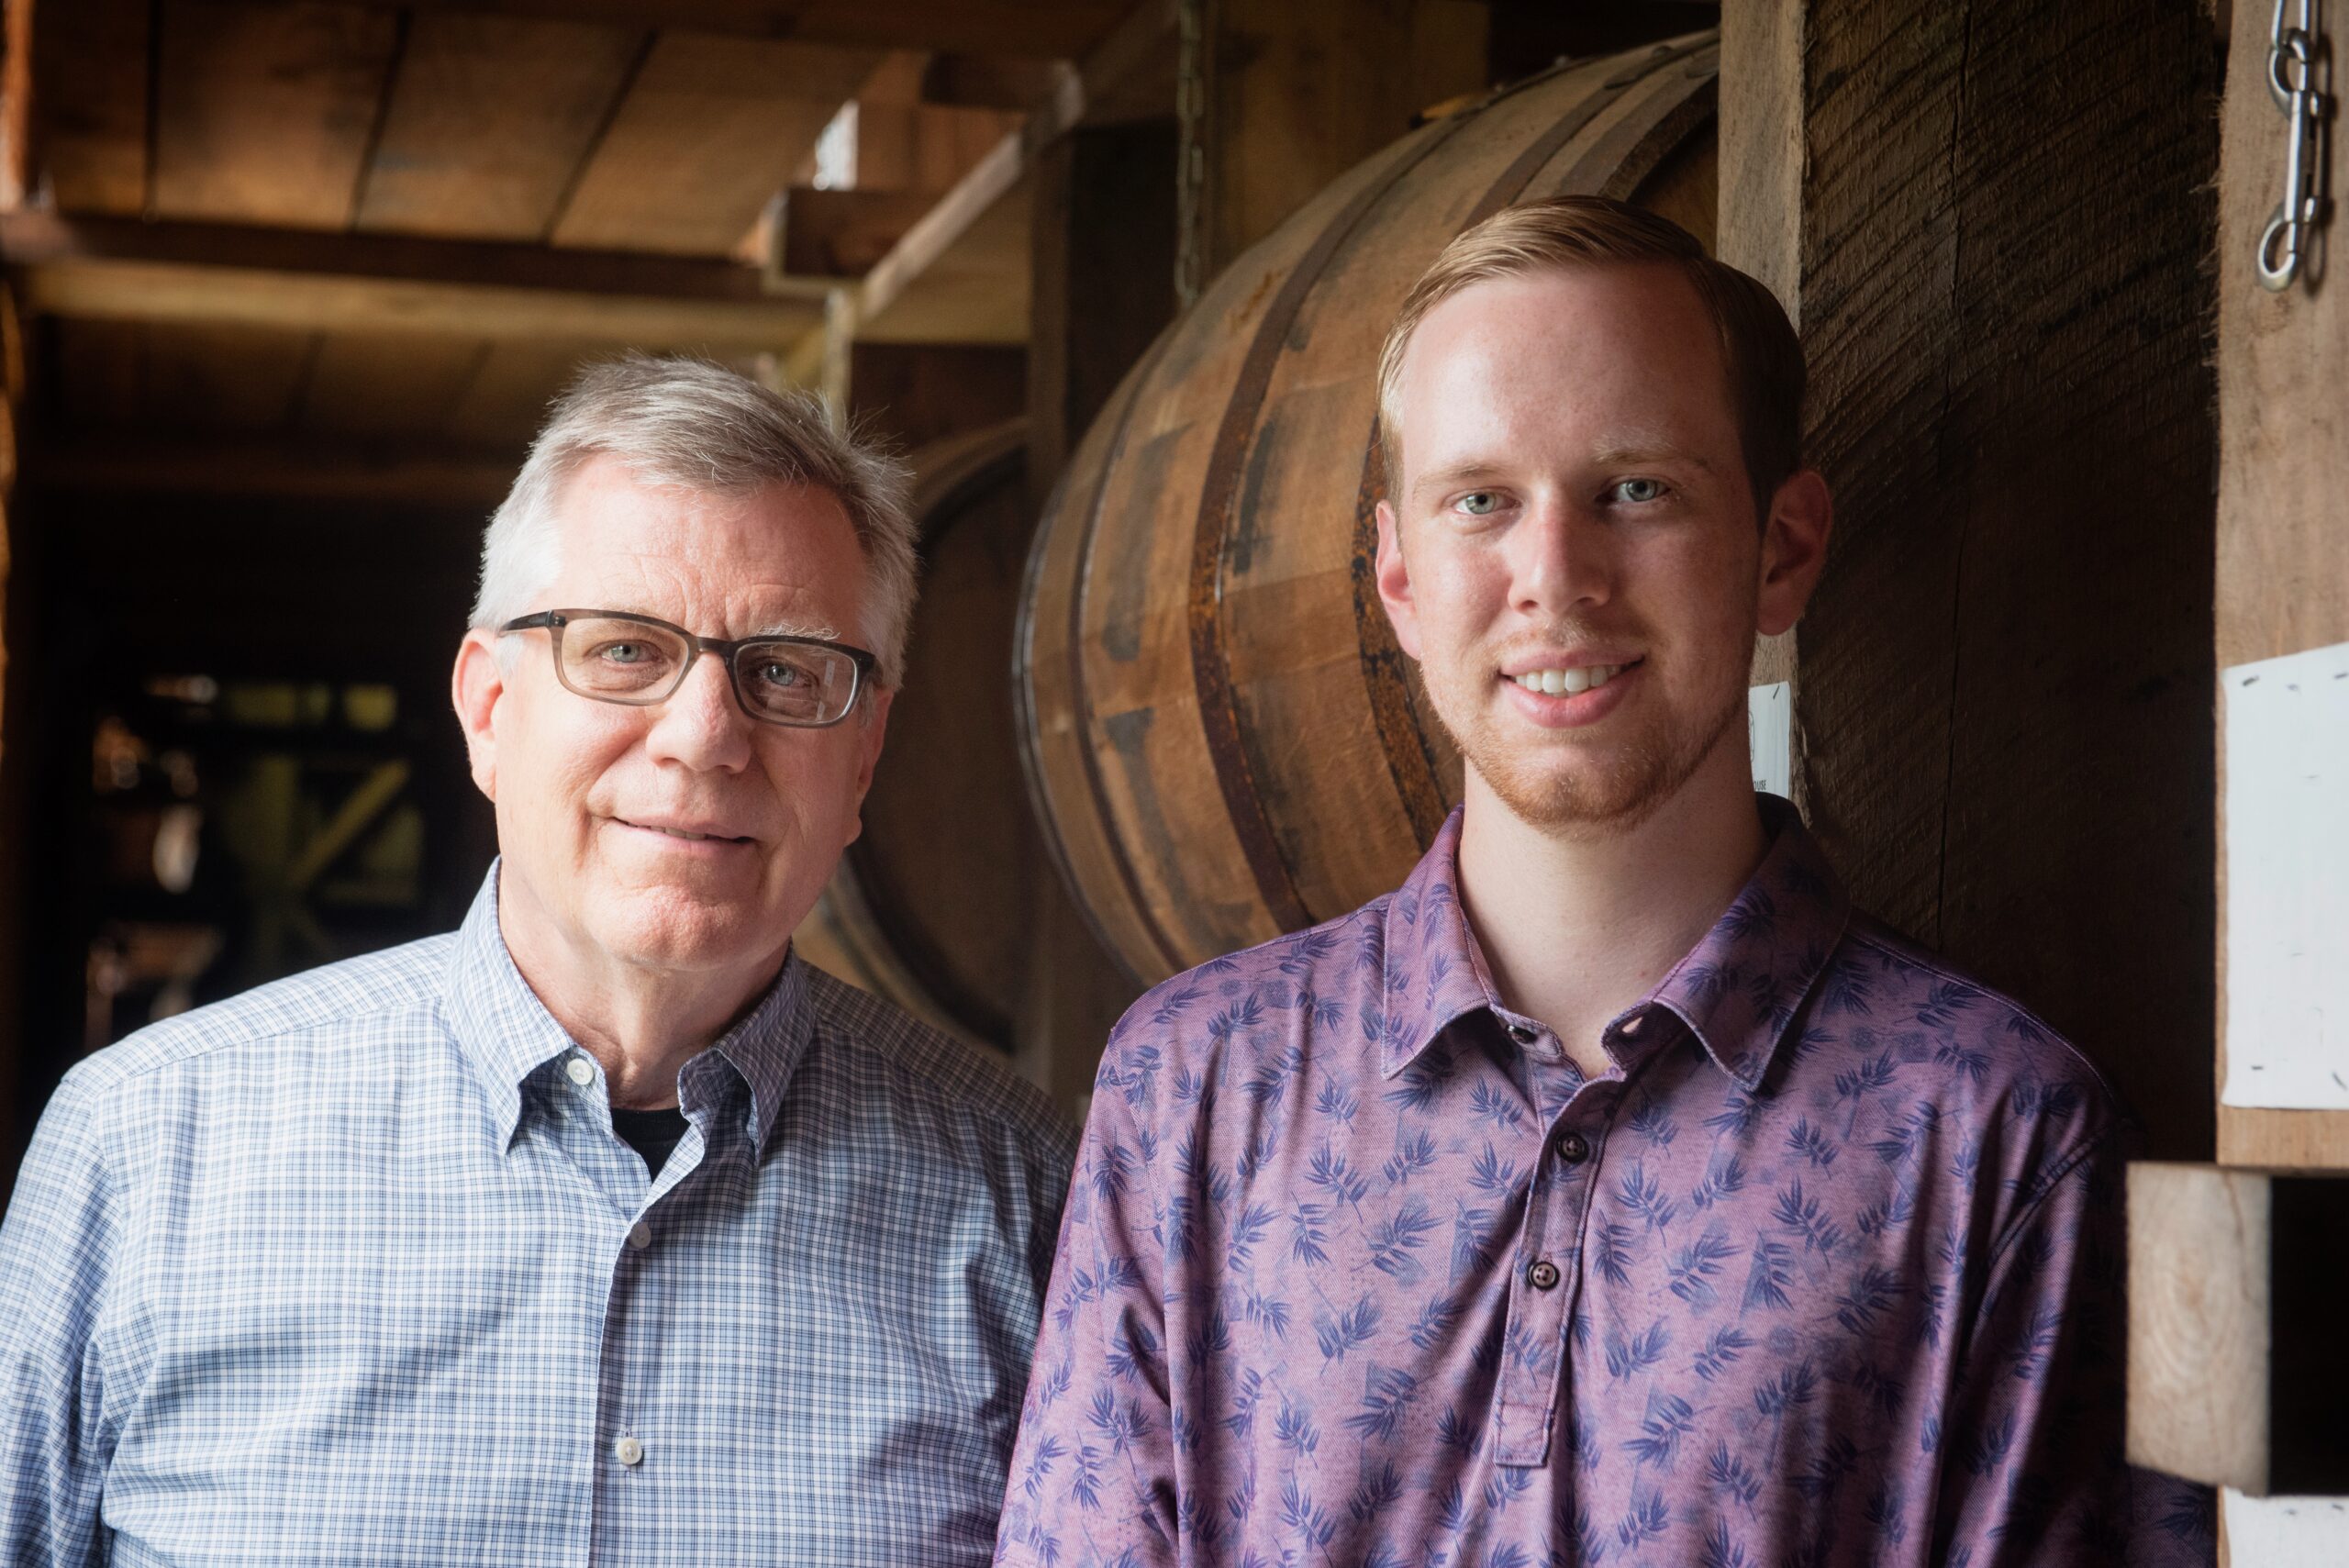 259: 15 STARS is the Father-Son Team Racking Up Big Whiskey Awards